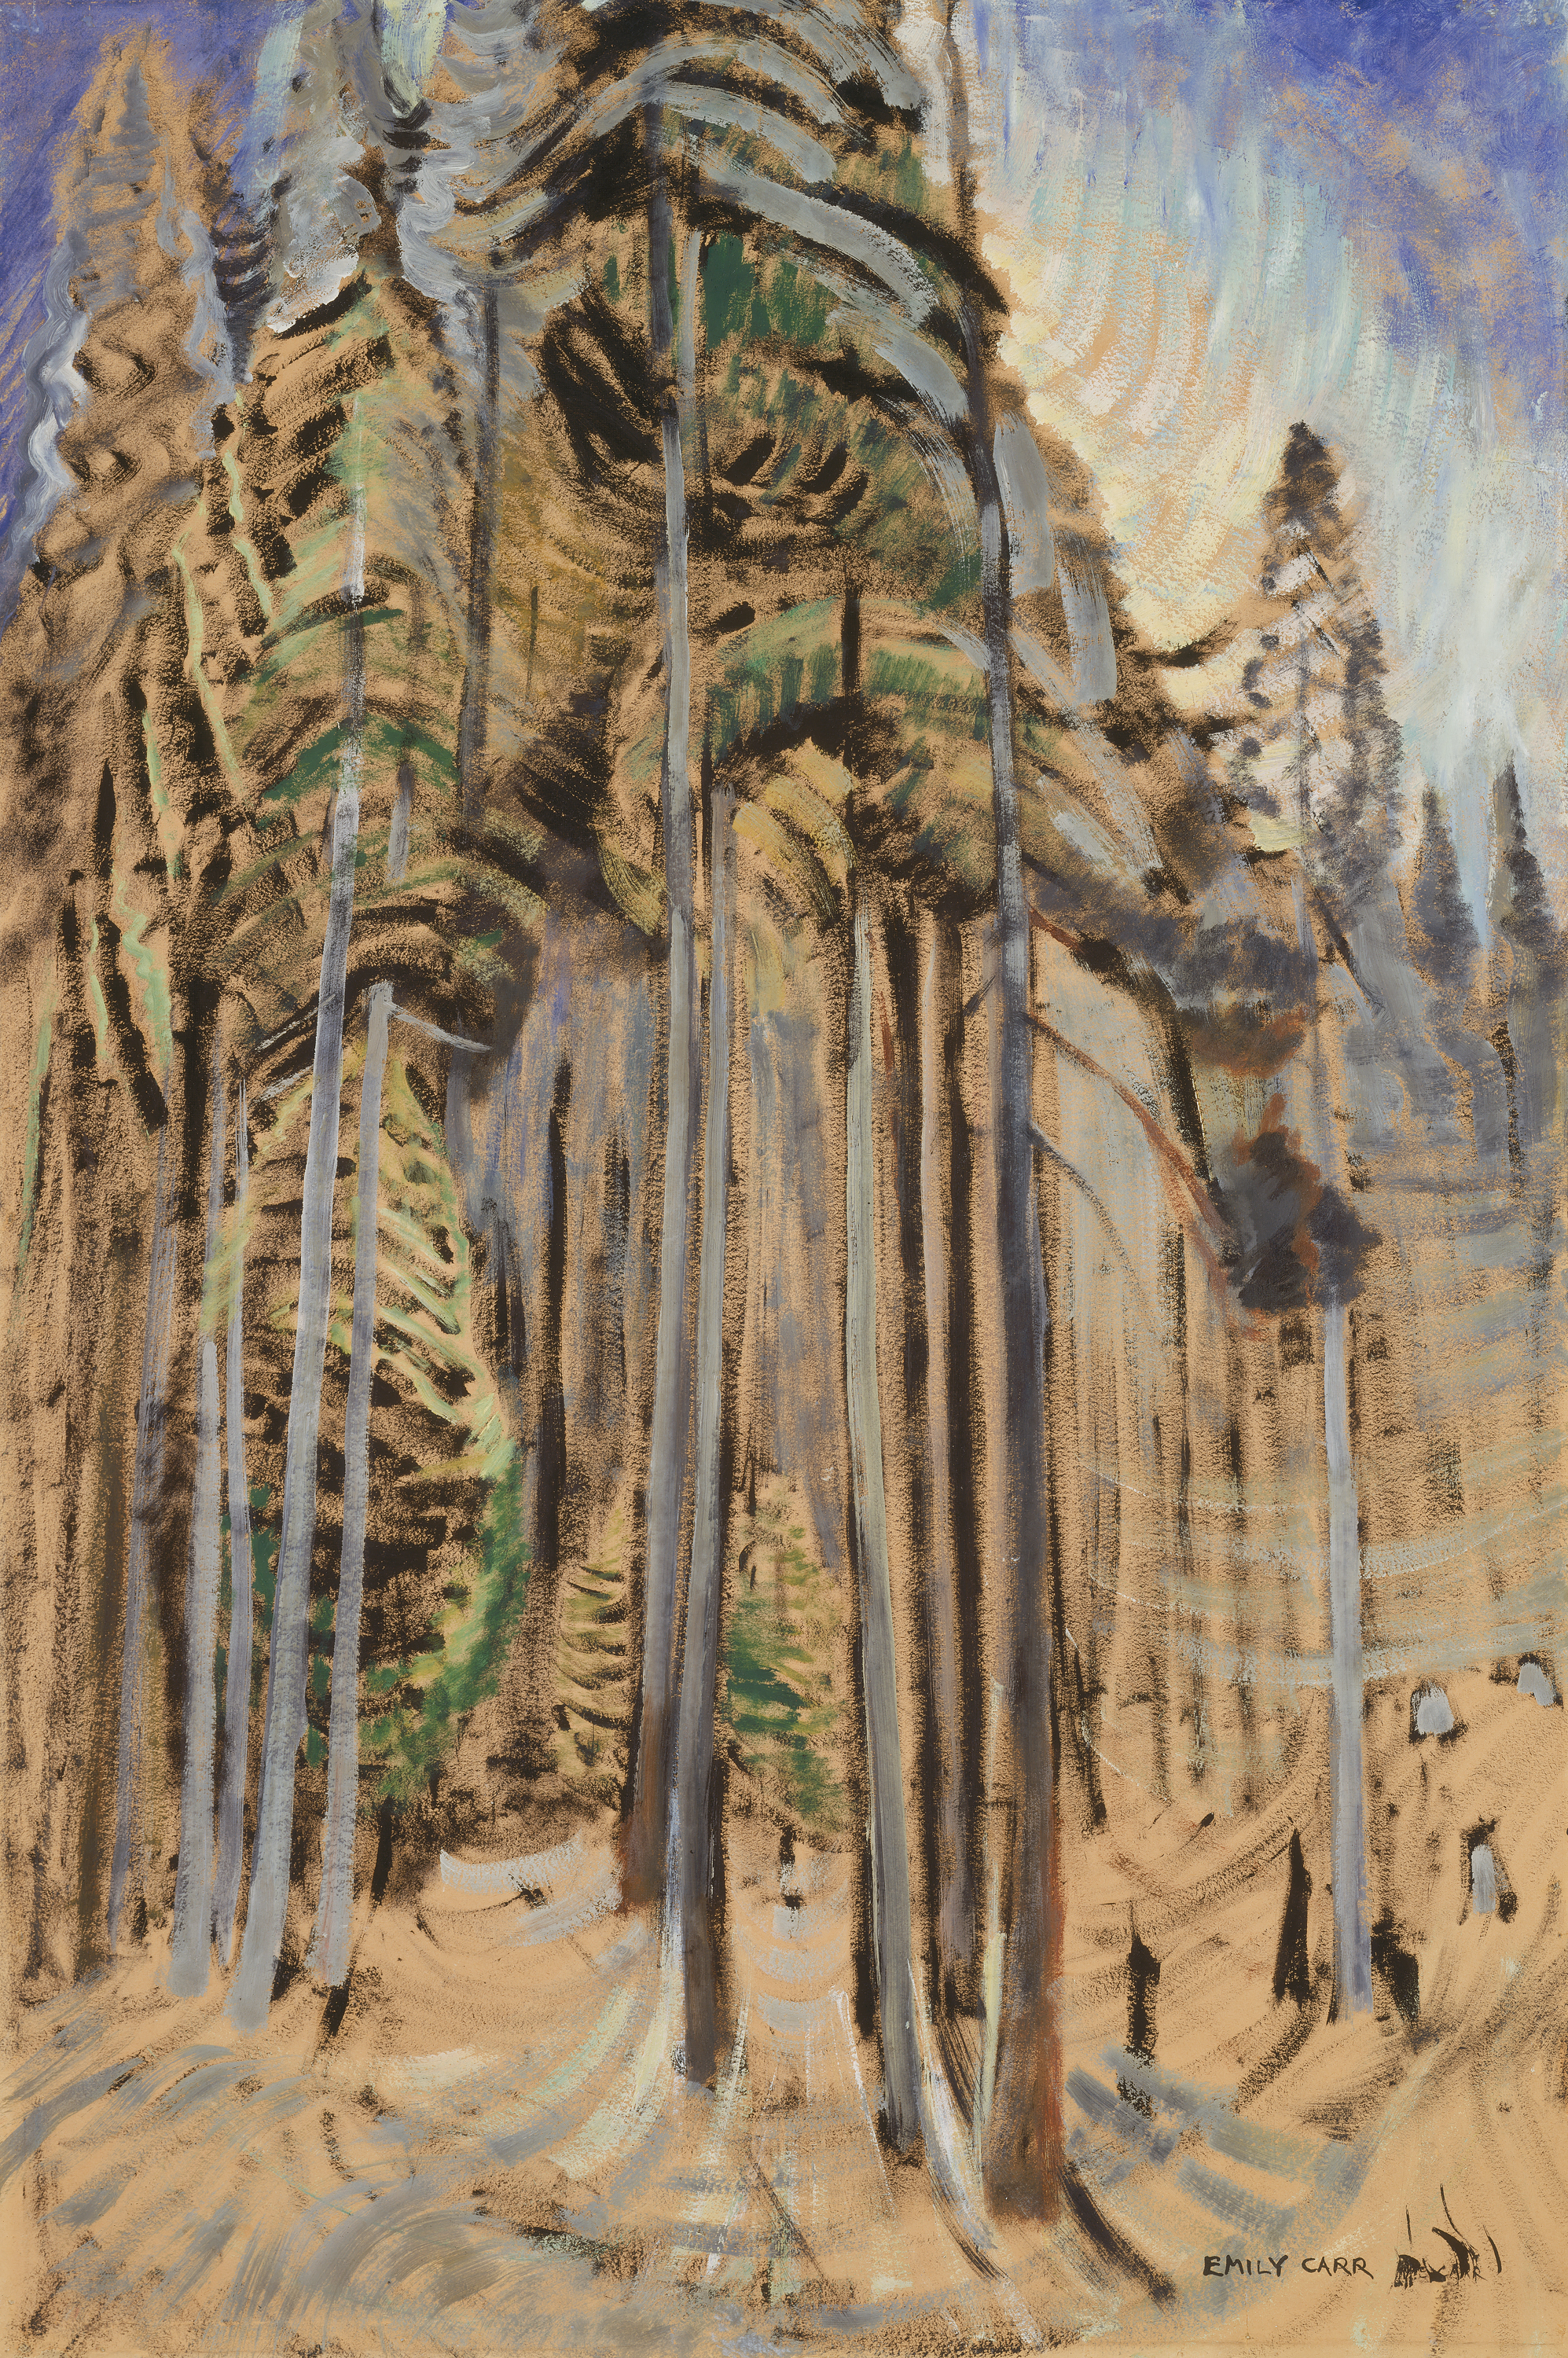 Oil painting of a forest scene with tall coniferous trees with a blue sky visible in the upper right corner.